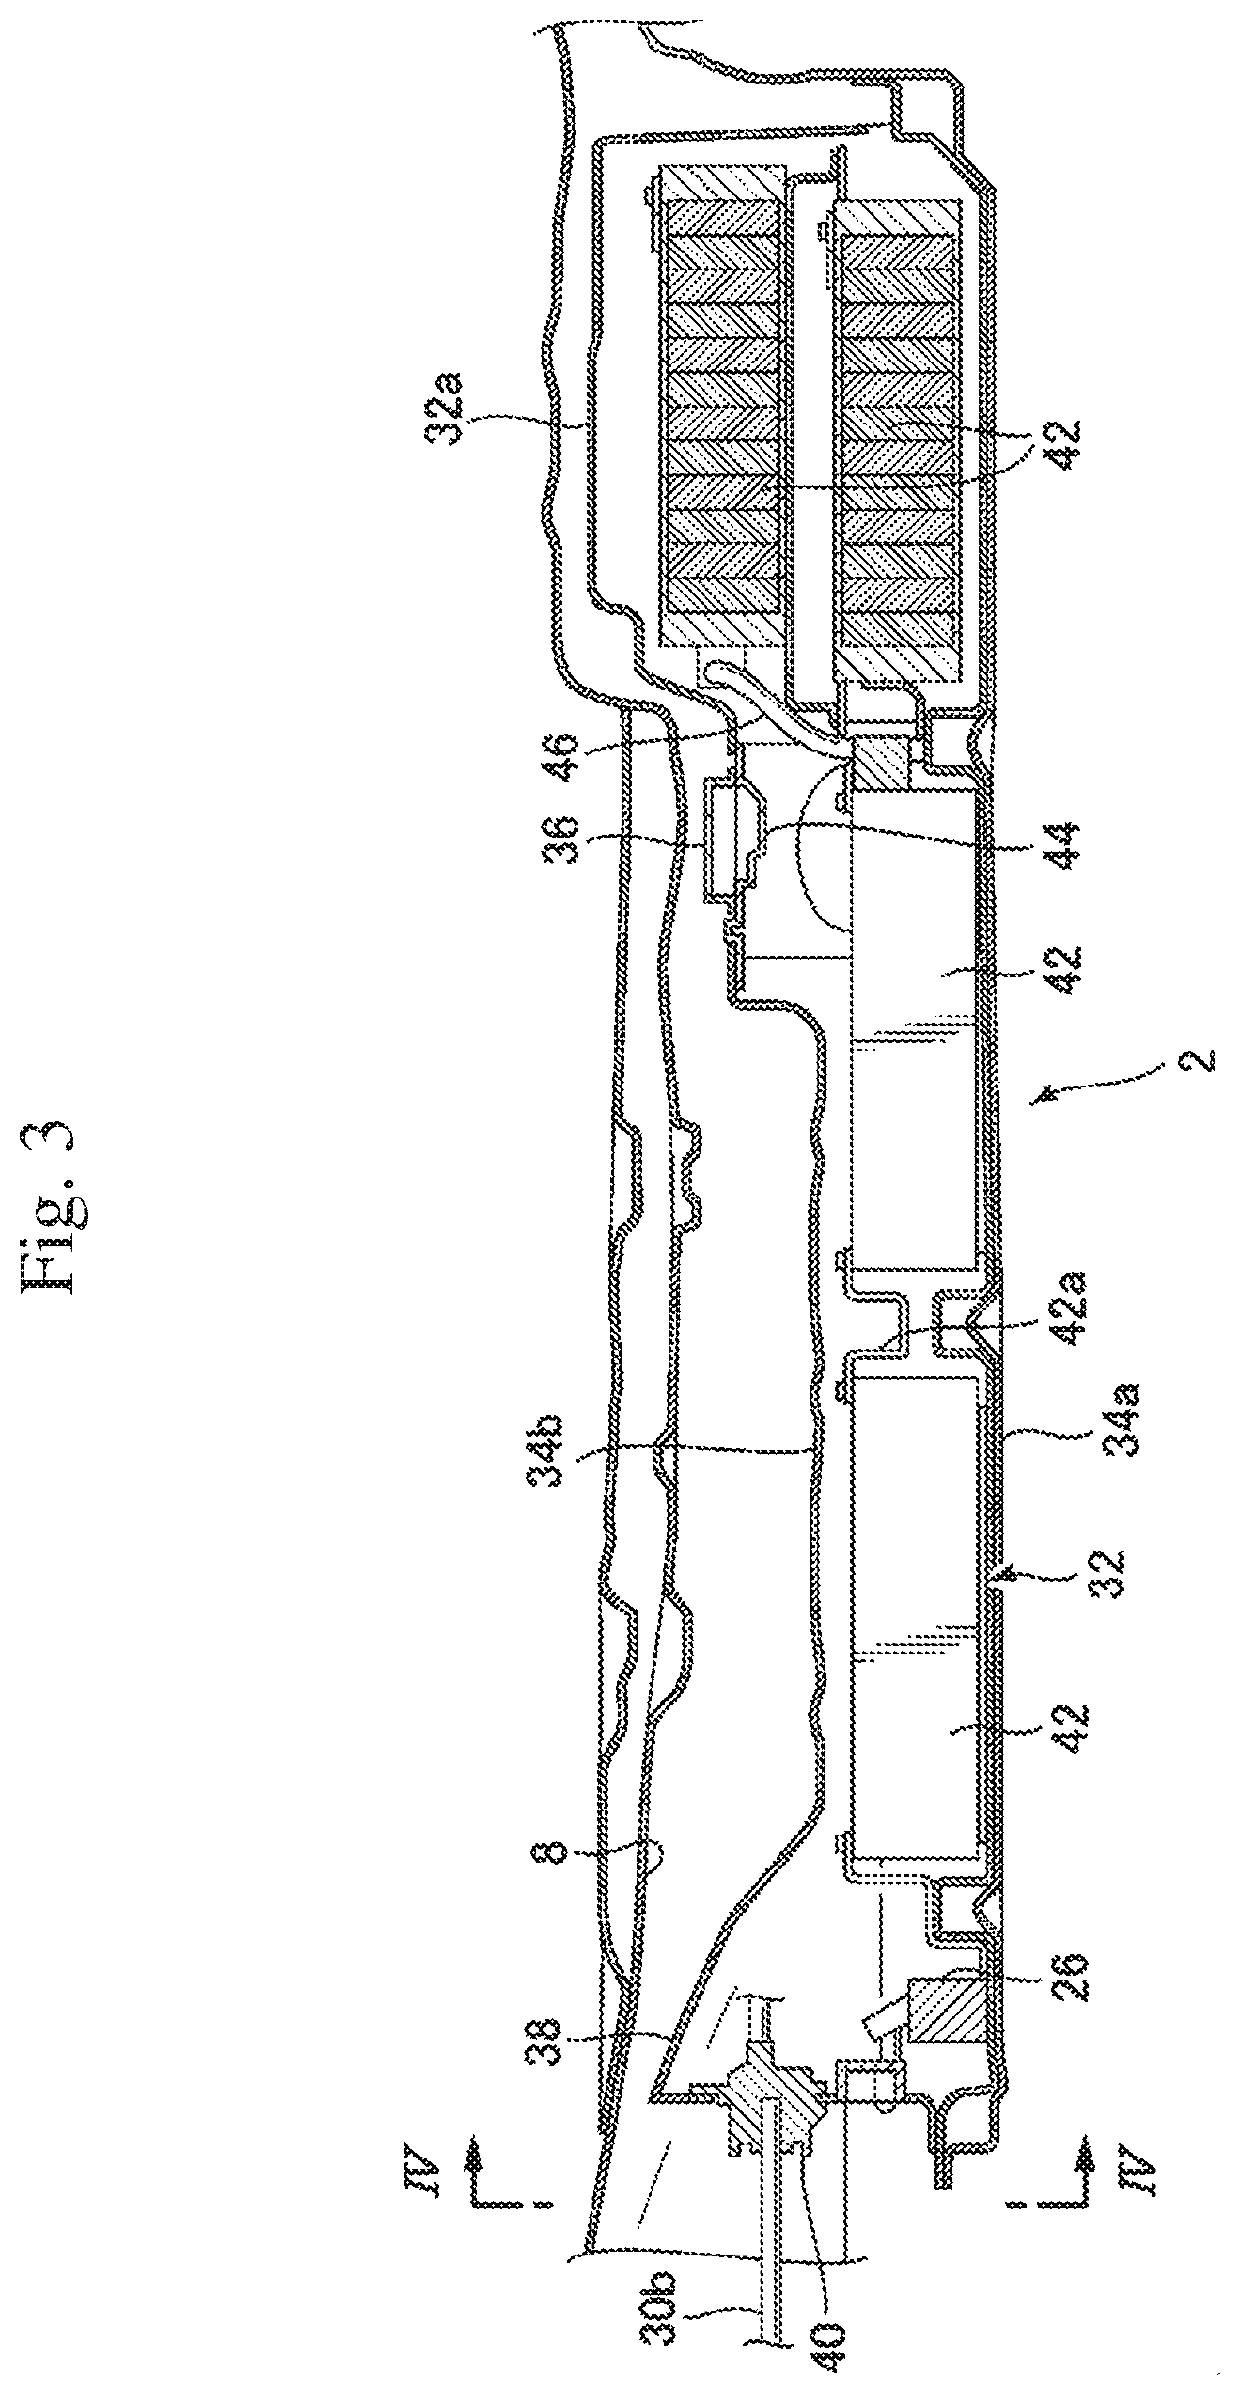 Battery device for vehicle